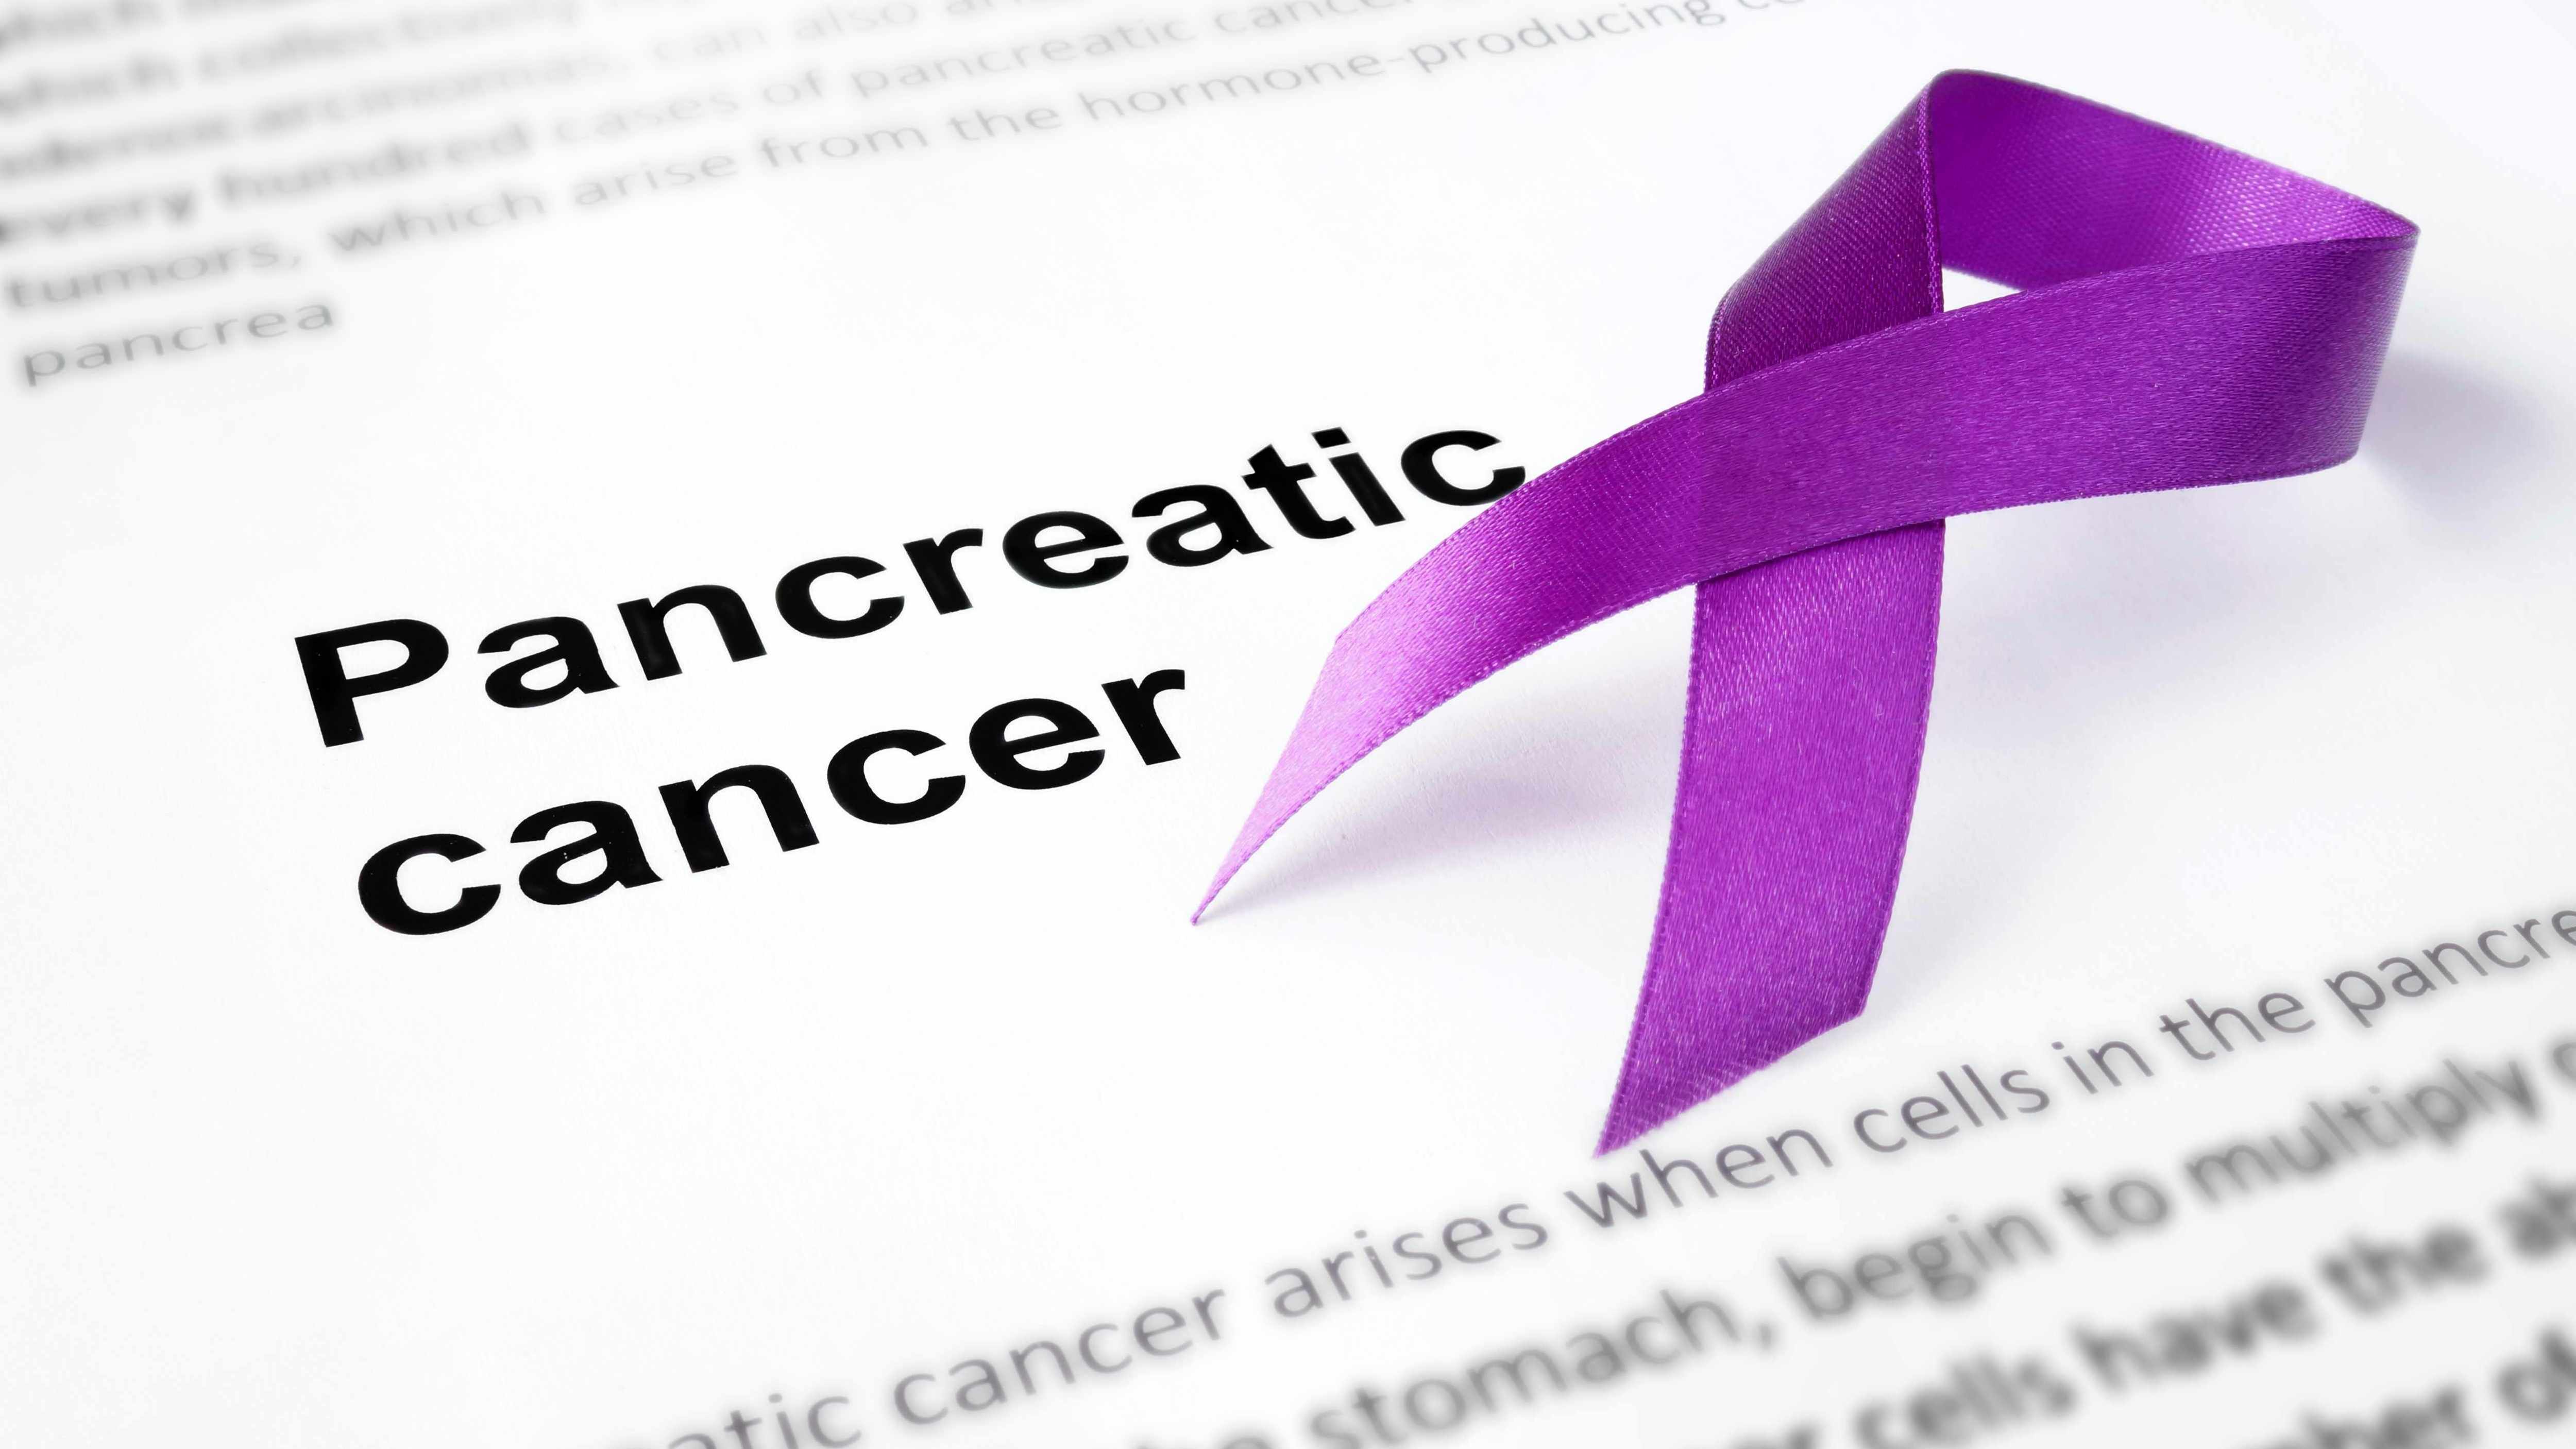 Latest development in treatment for pancreatic cancer